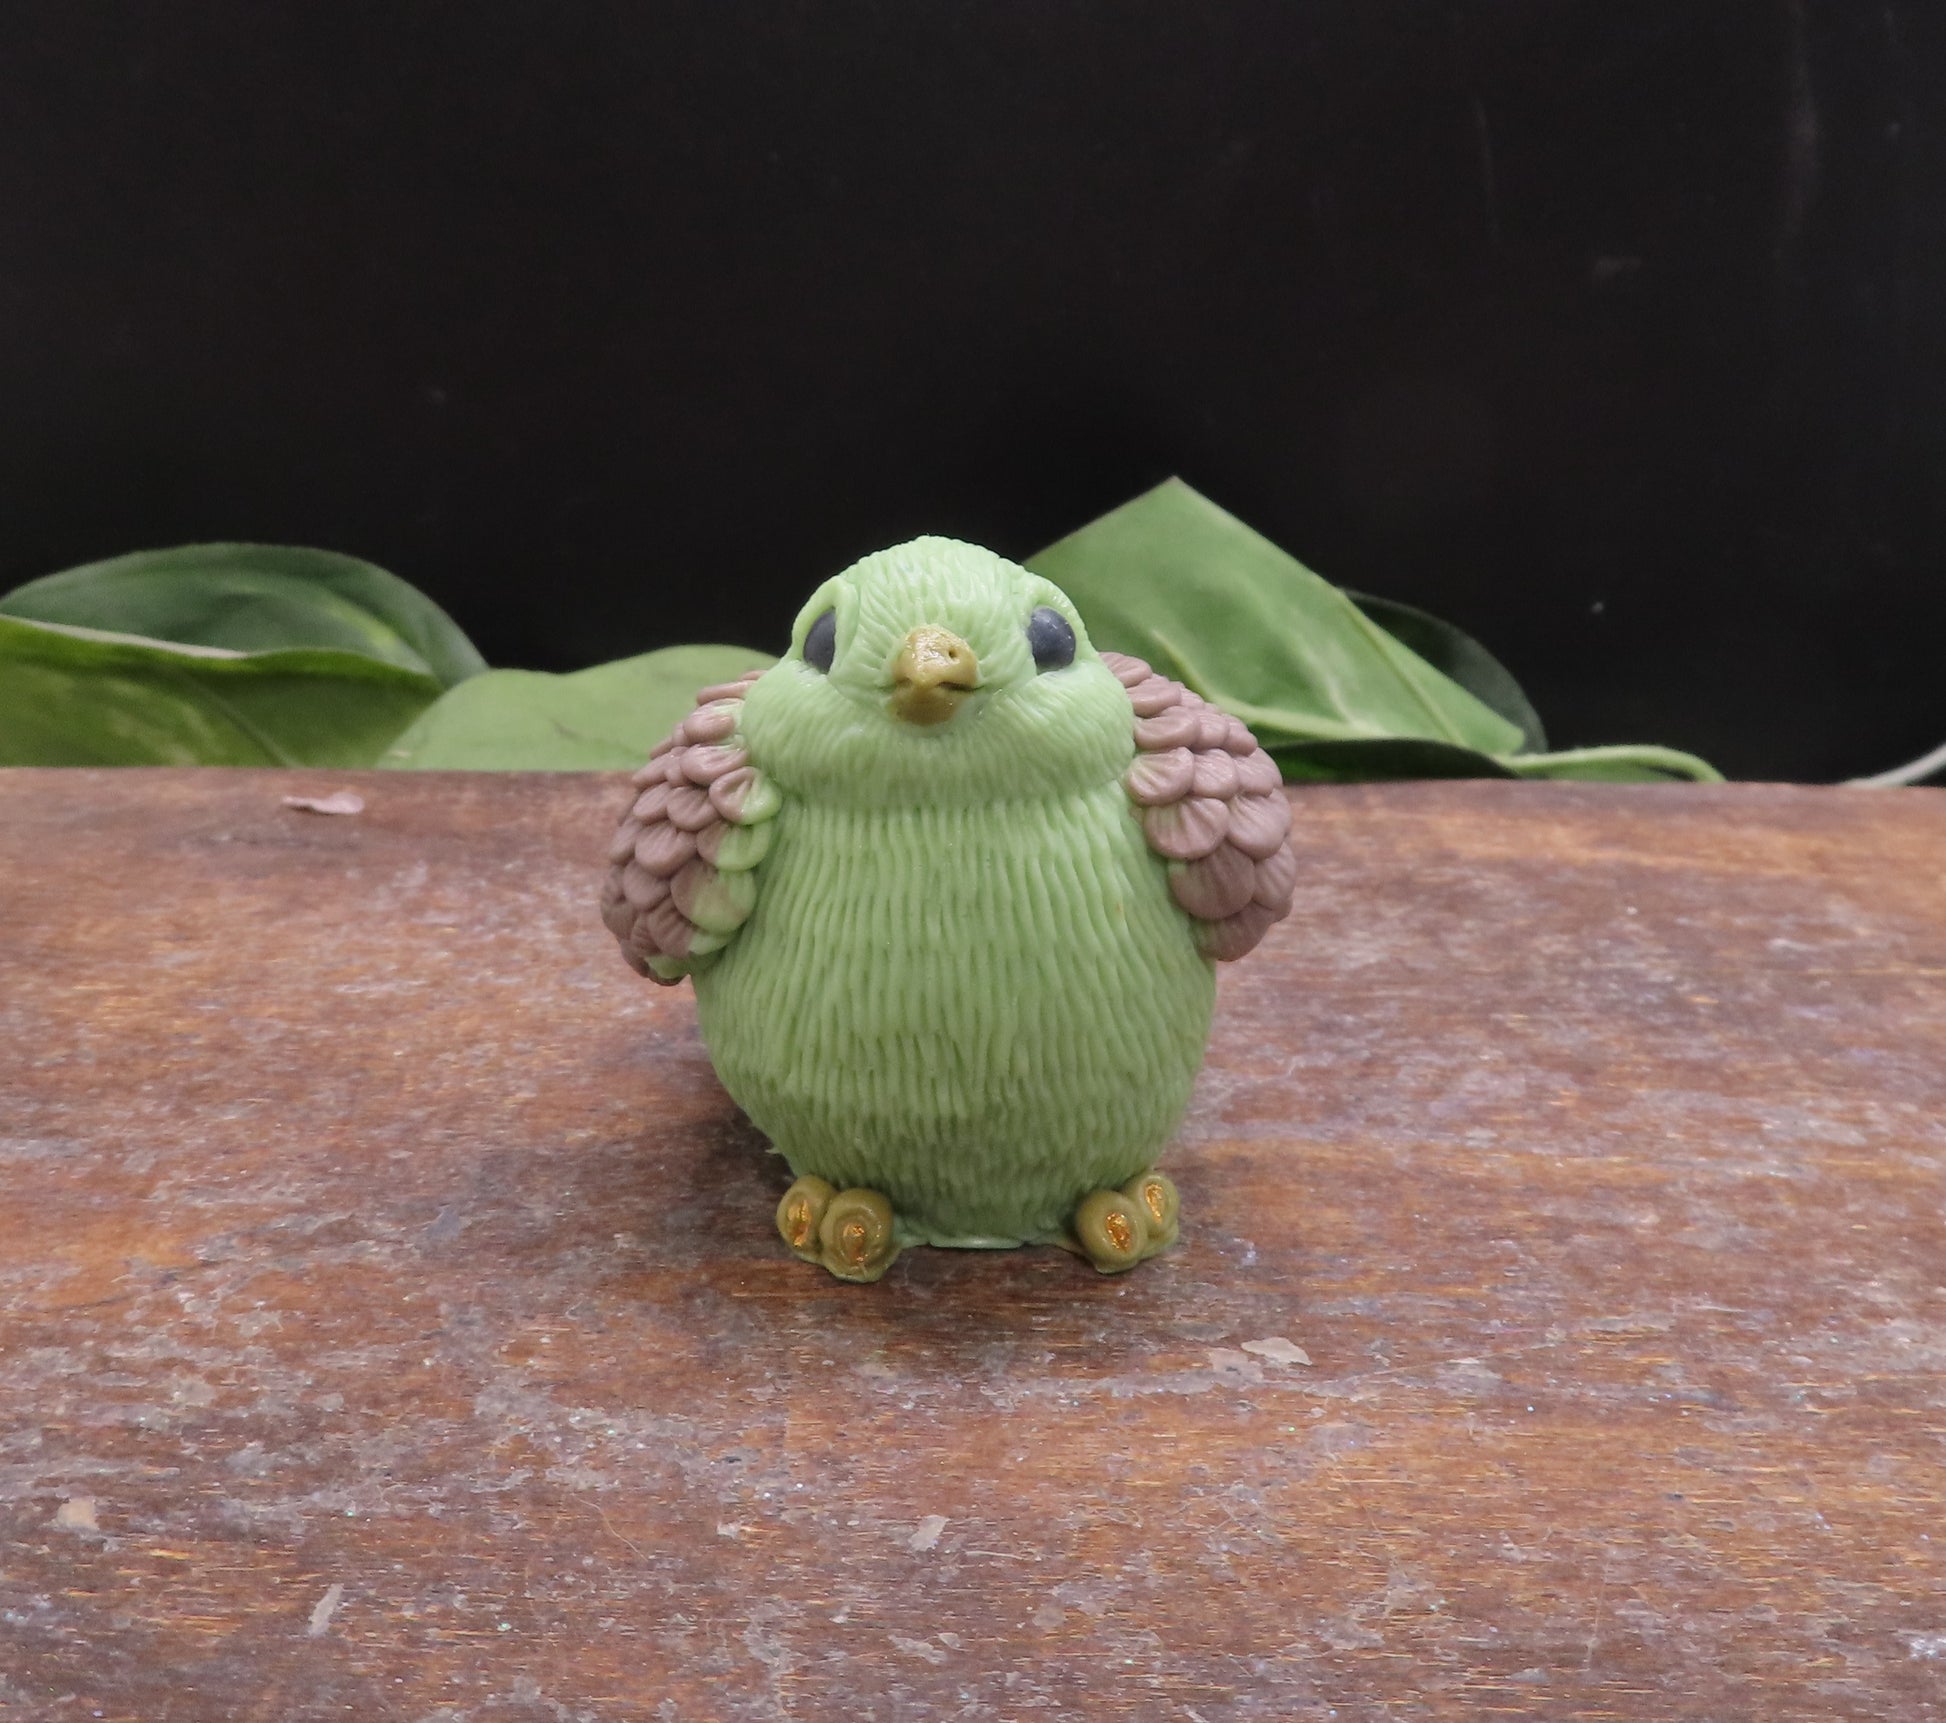 soap bird showing green chest coloration.  unique mothers day gift.  